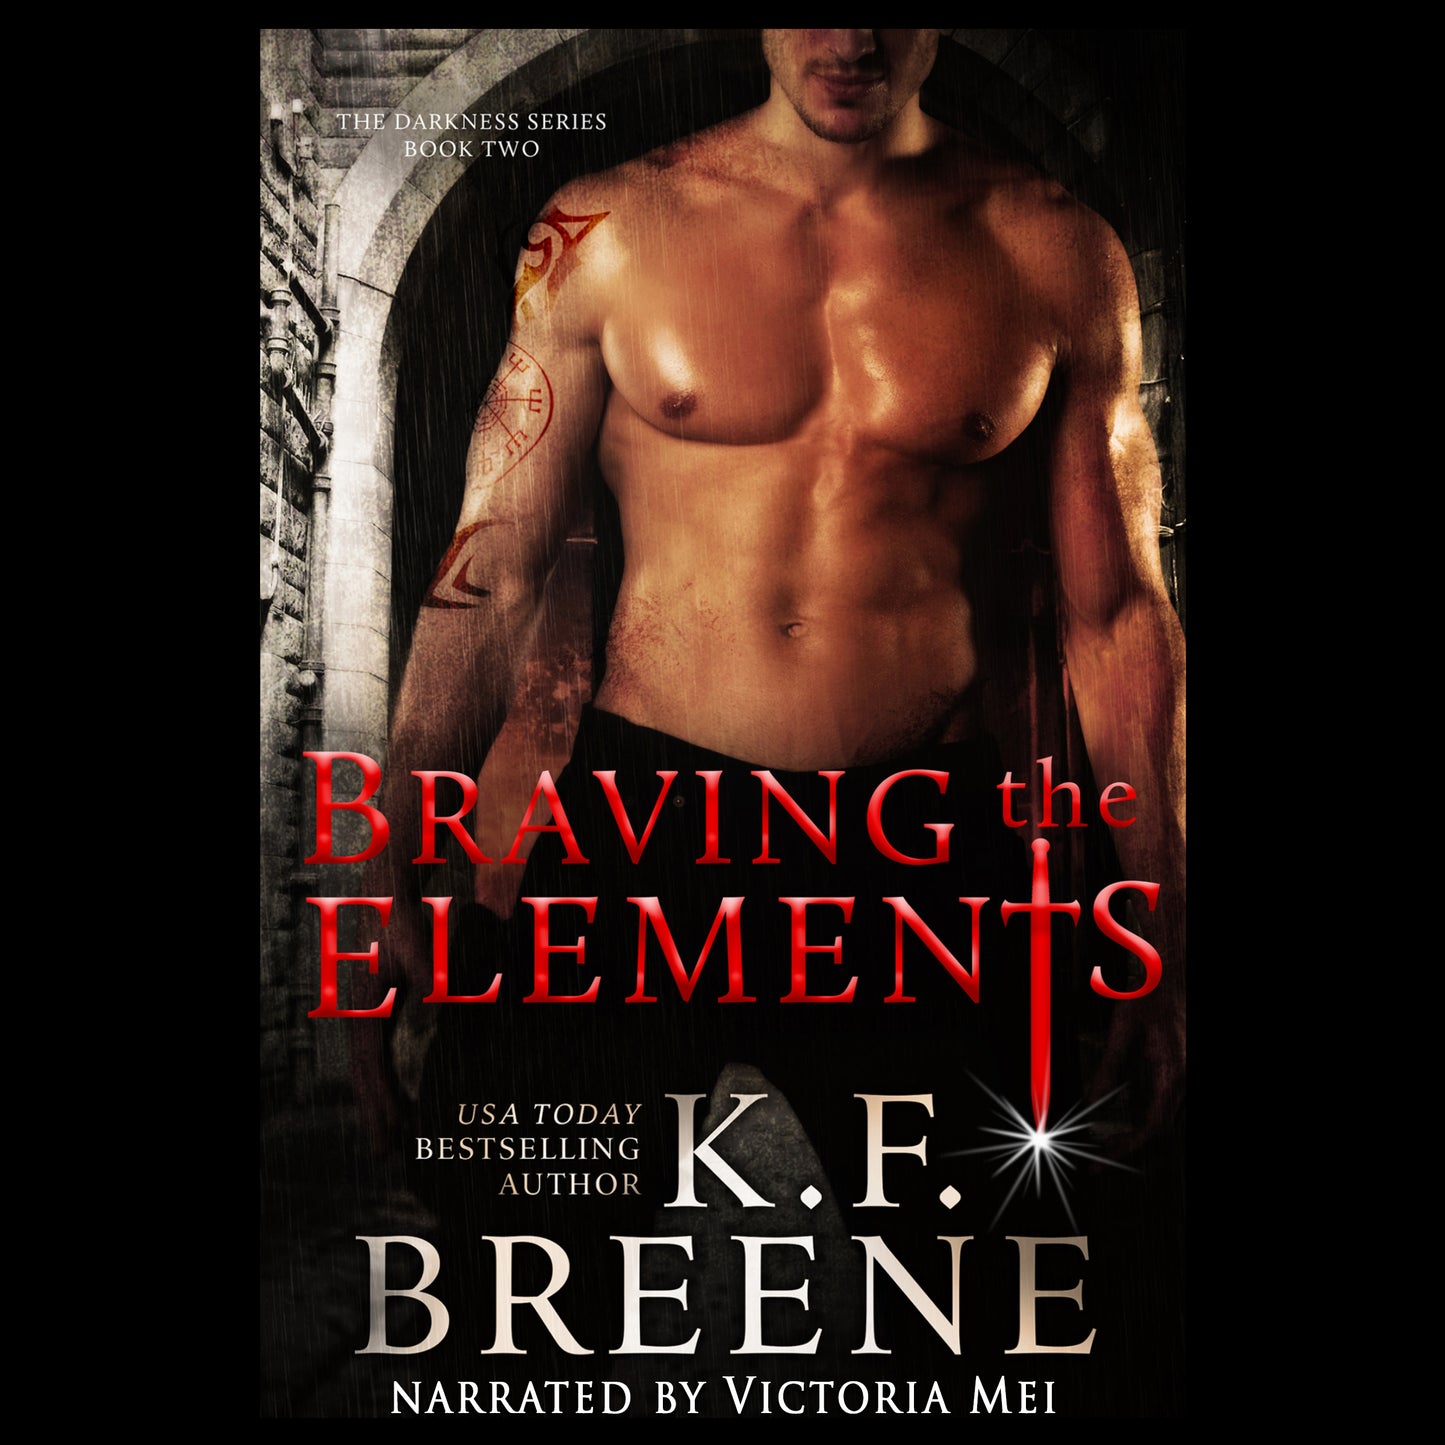 Braving the Elements audiobook (Darkness series, book 2)